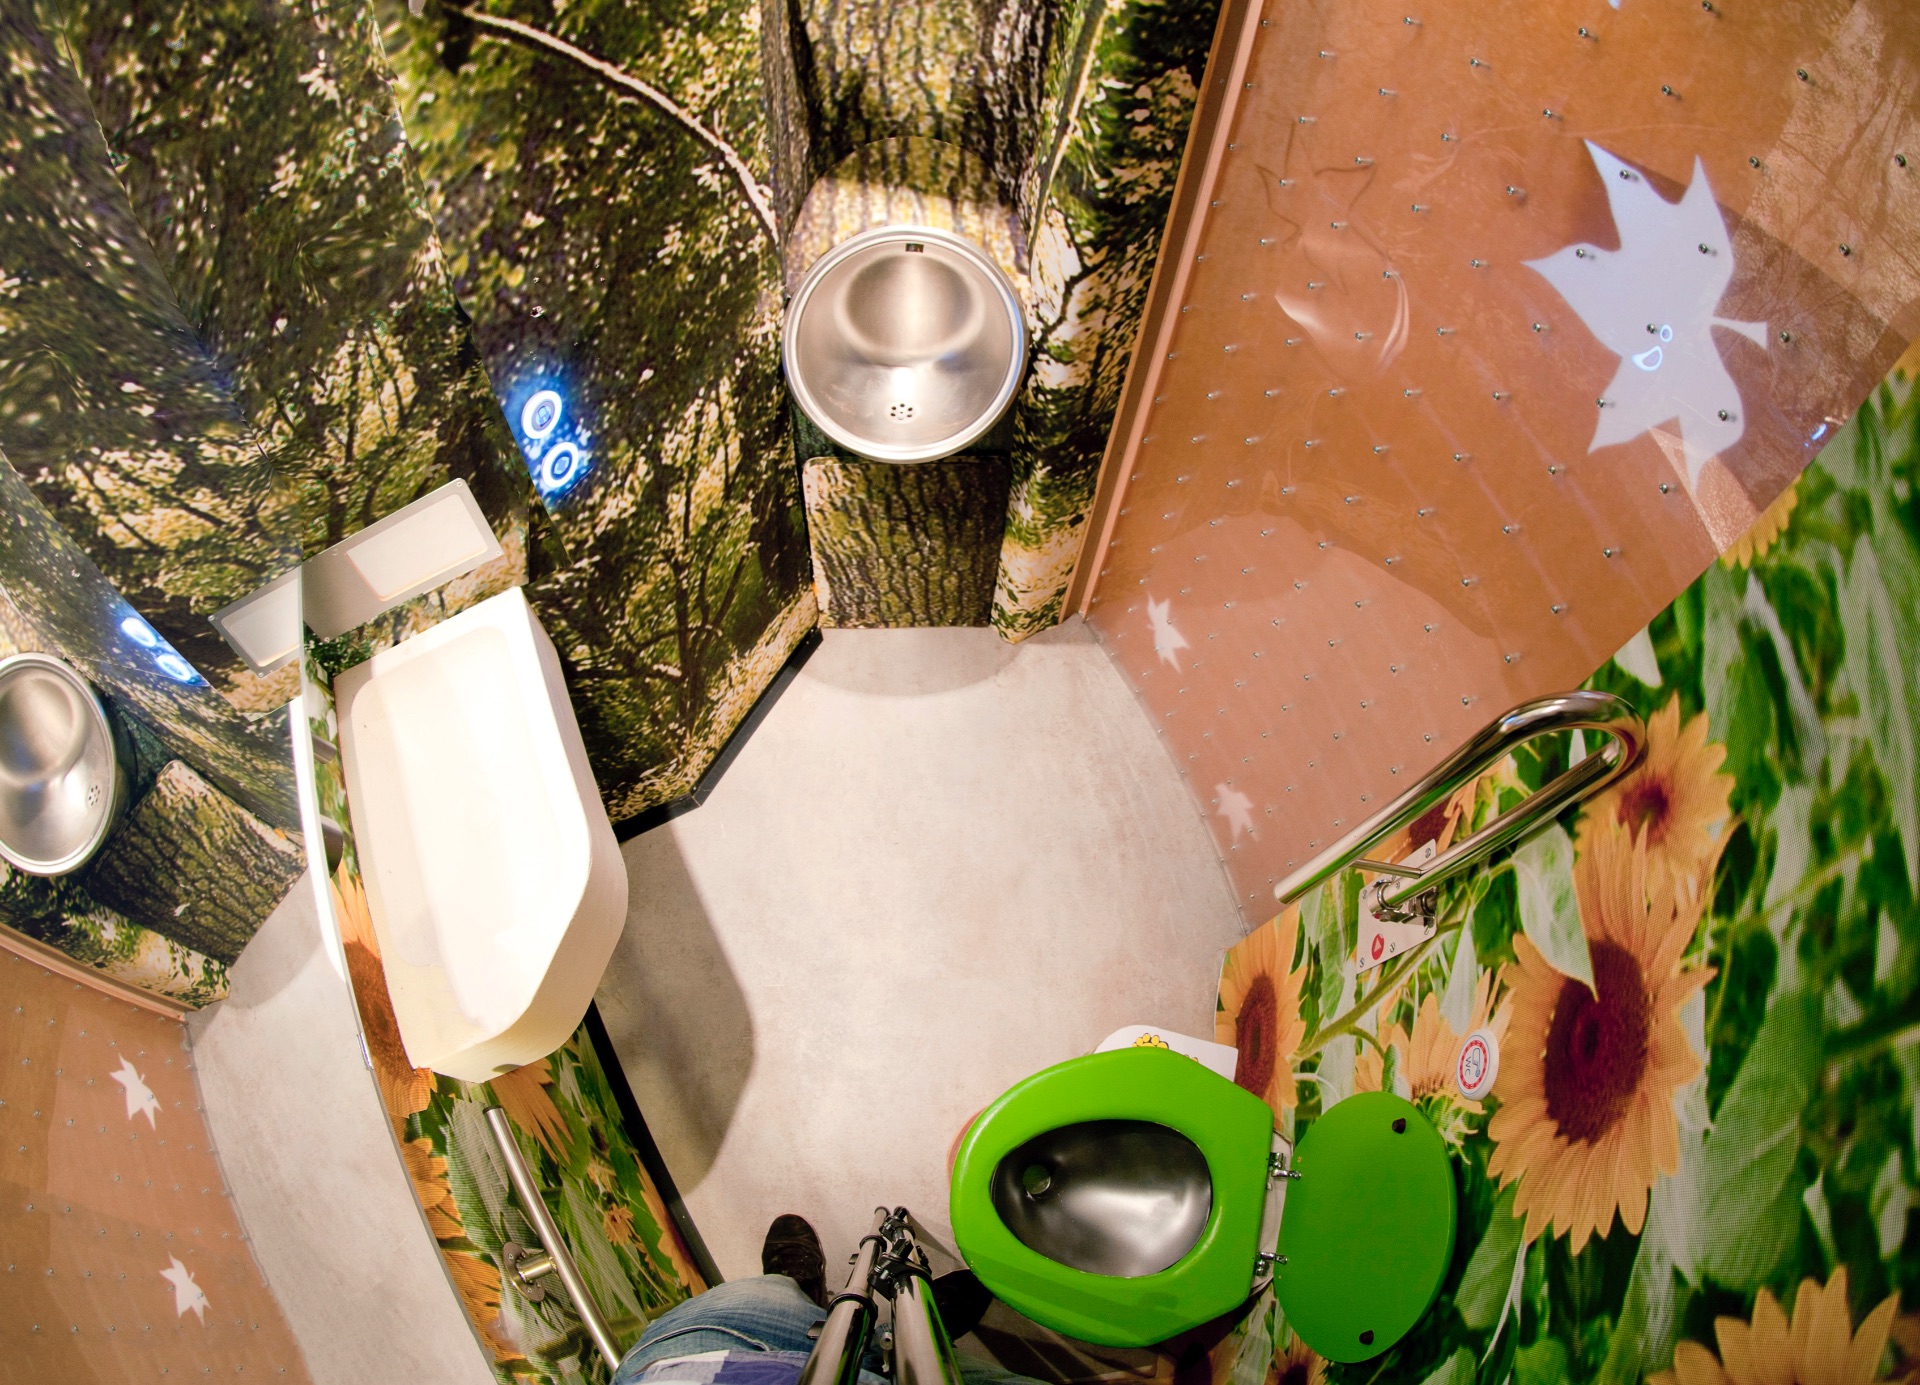 Automatic accessible train toilet with wall super-graphics of trees and flowers